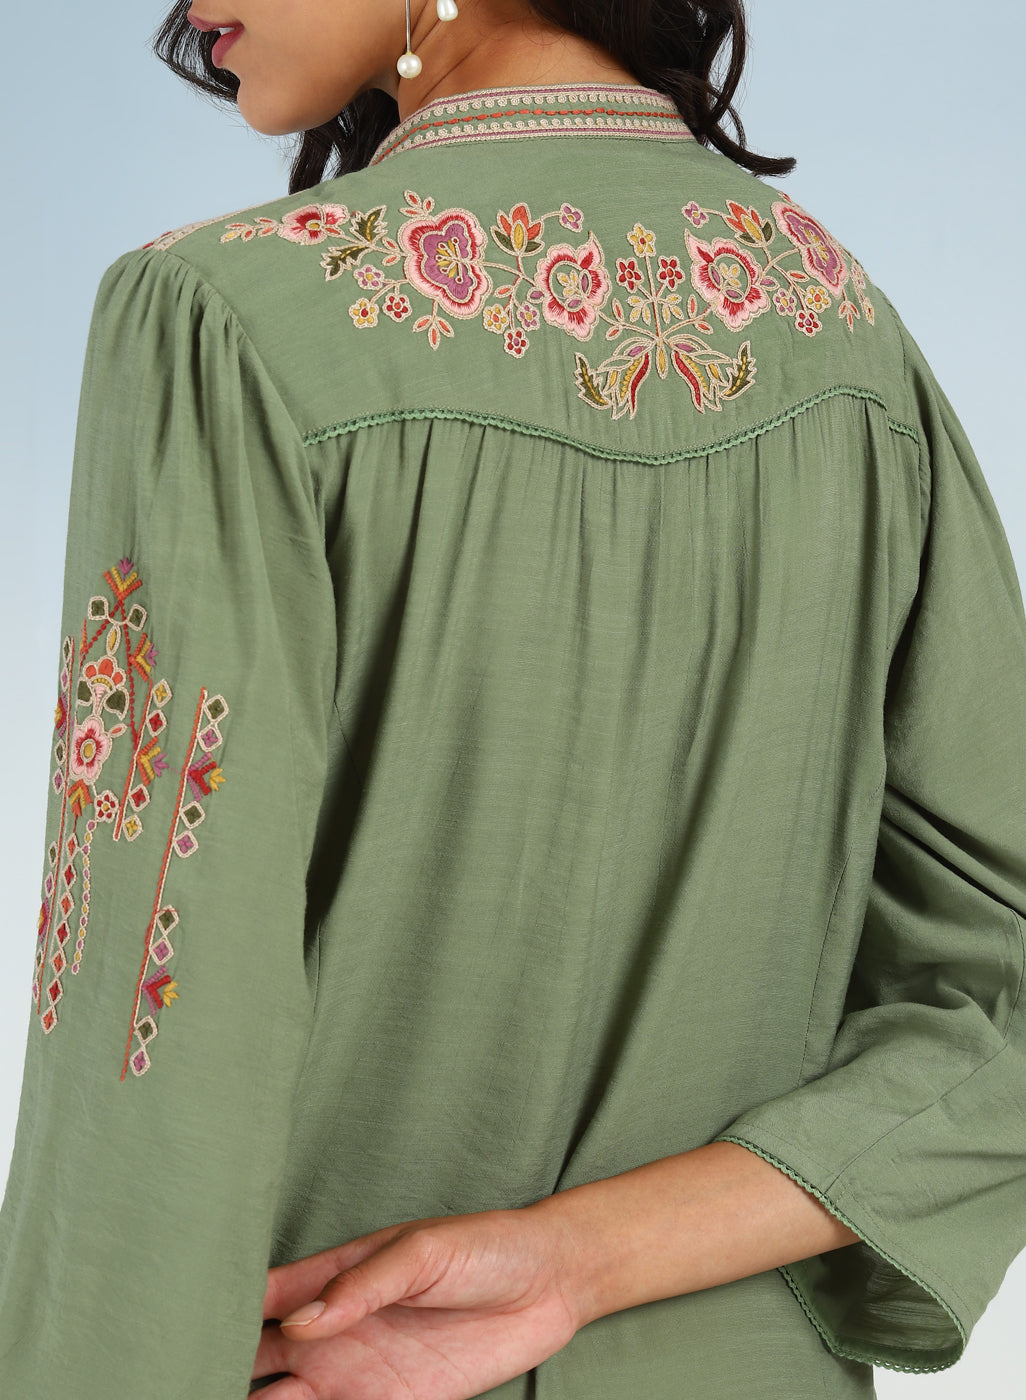 Green Floral Tunic with Shoulder Gathers